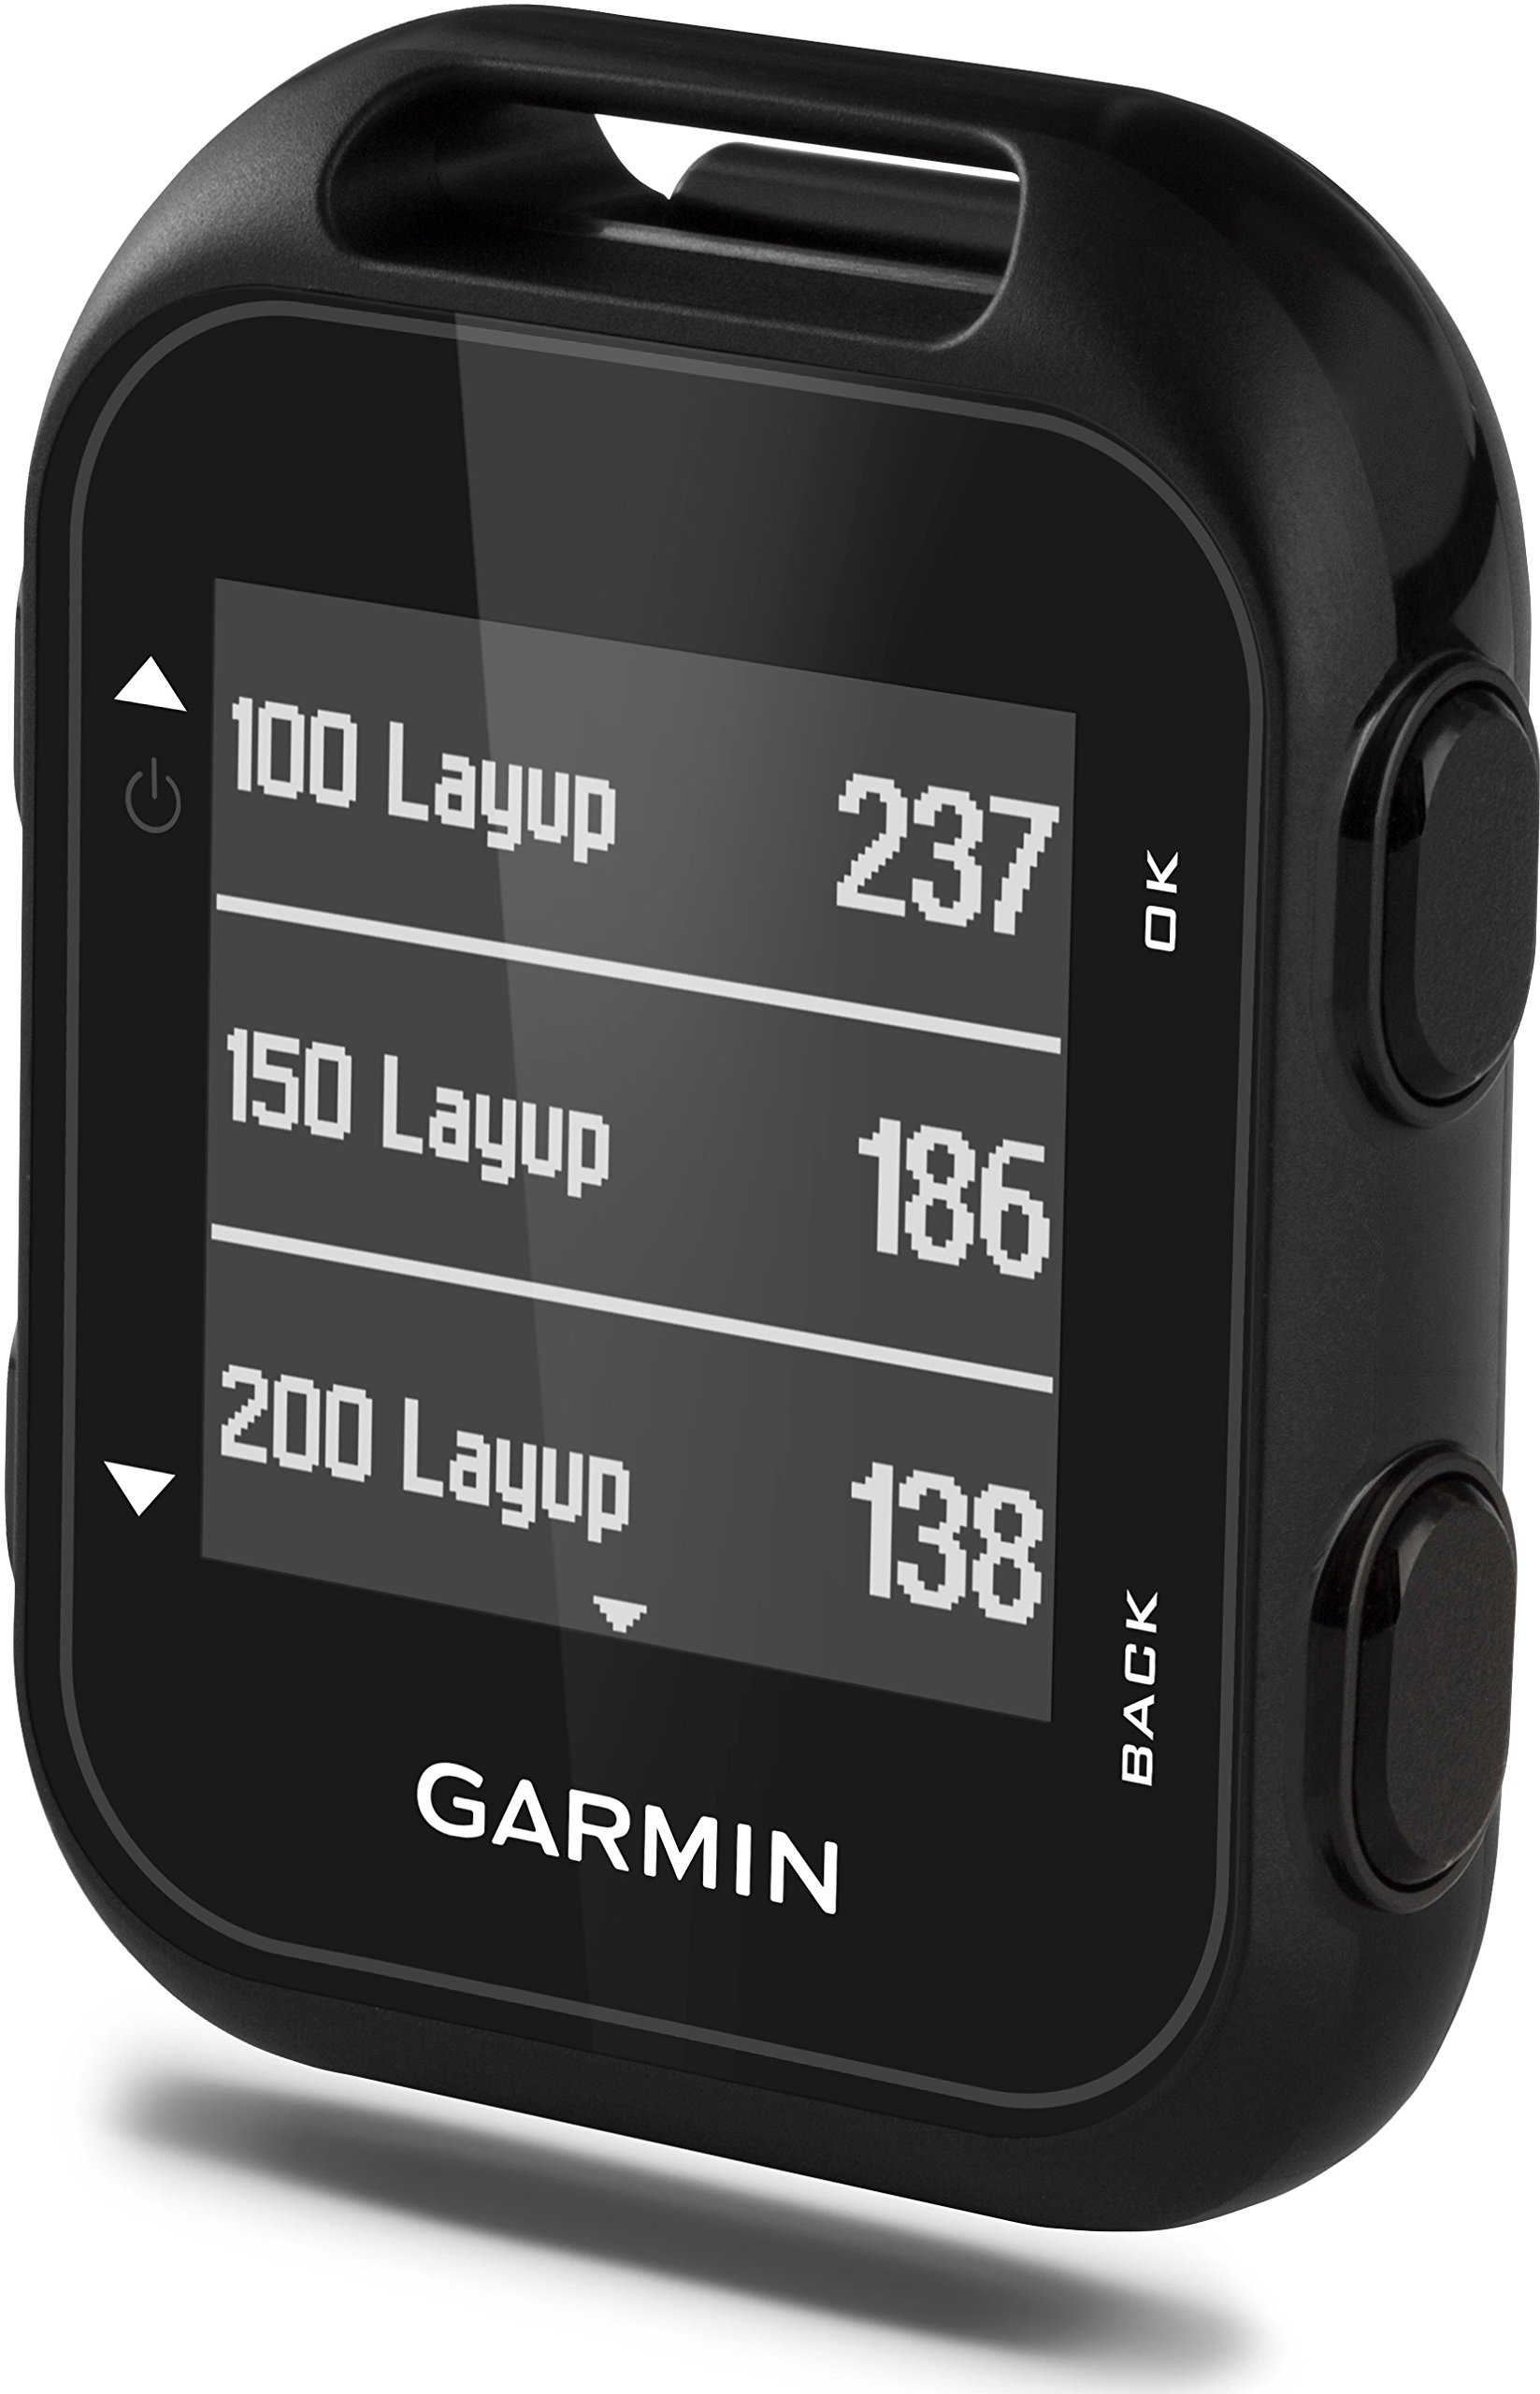 Garmin Approach G10, Compact and Handheld Golf GPS with 1.3-inch Display, Black